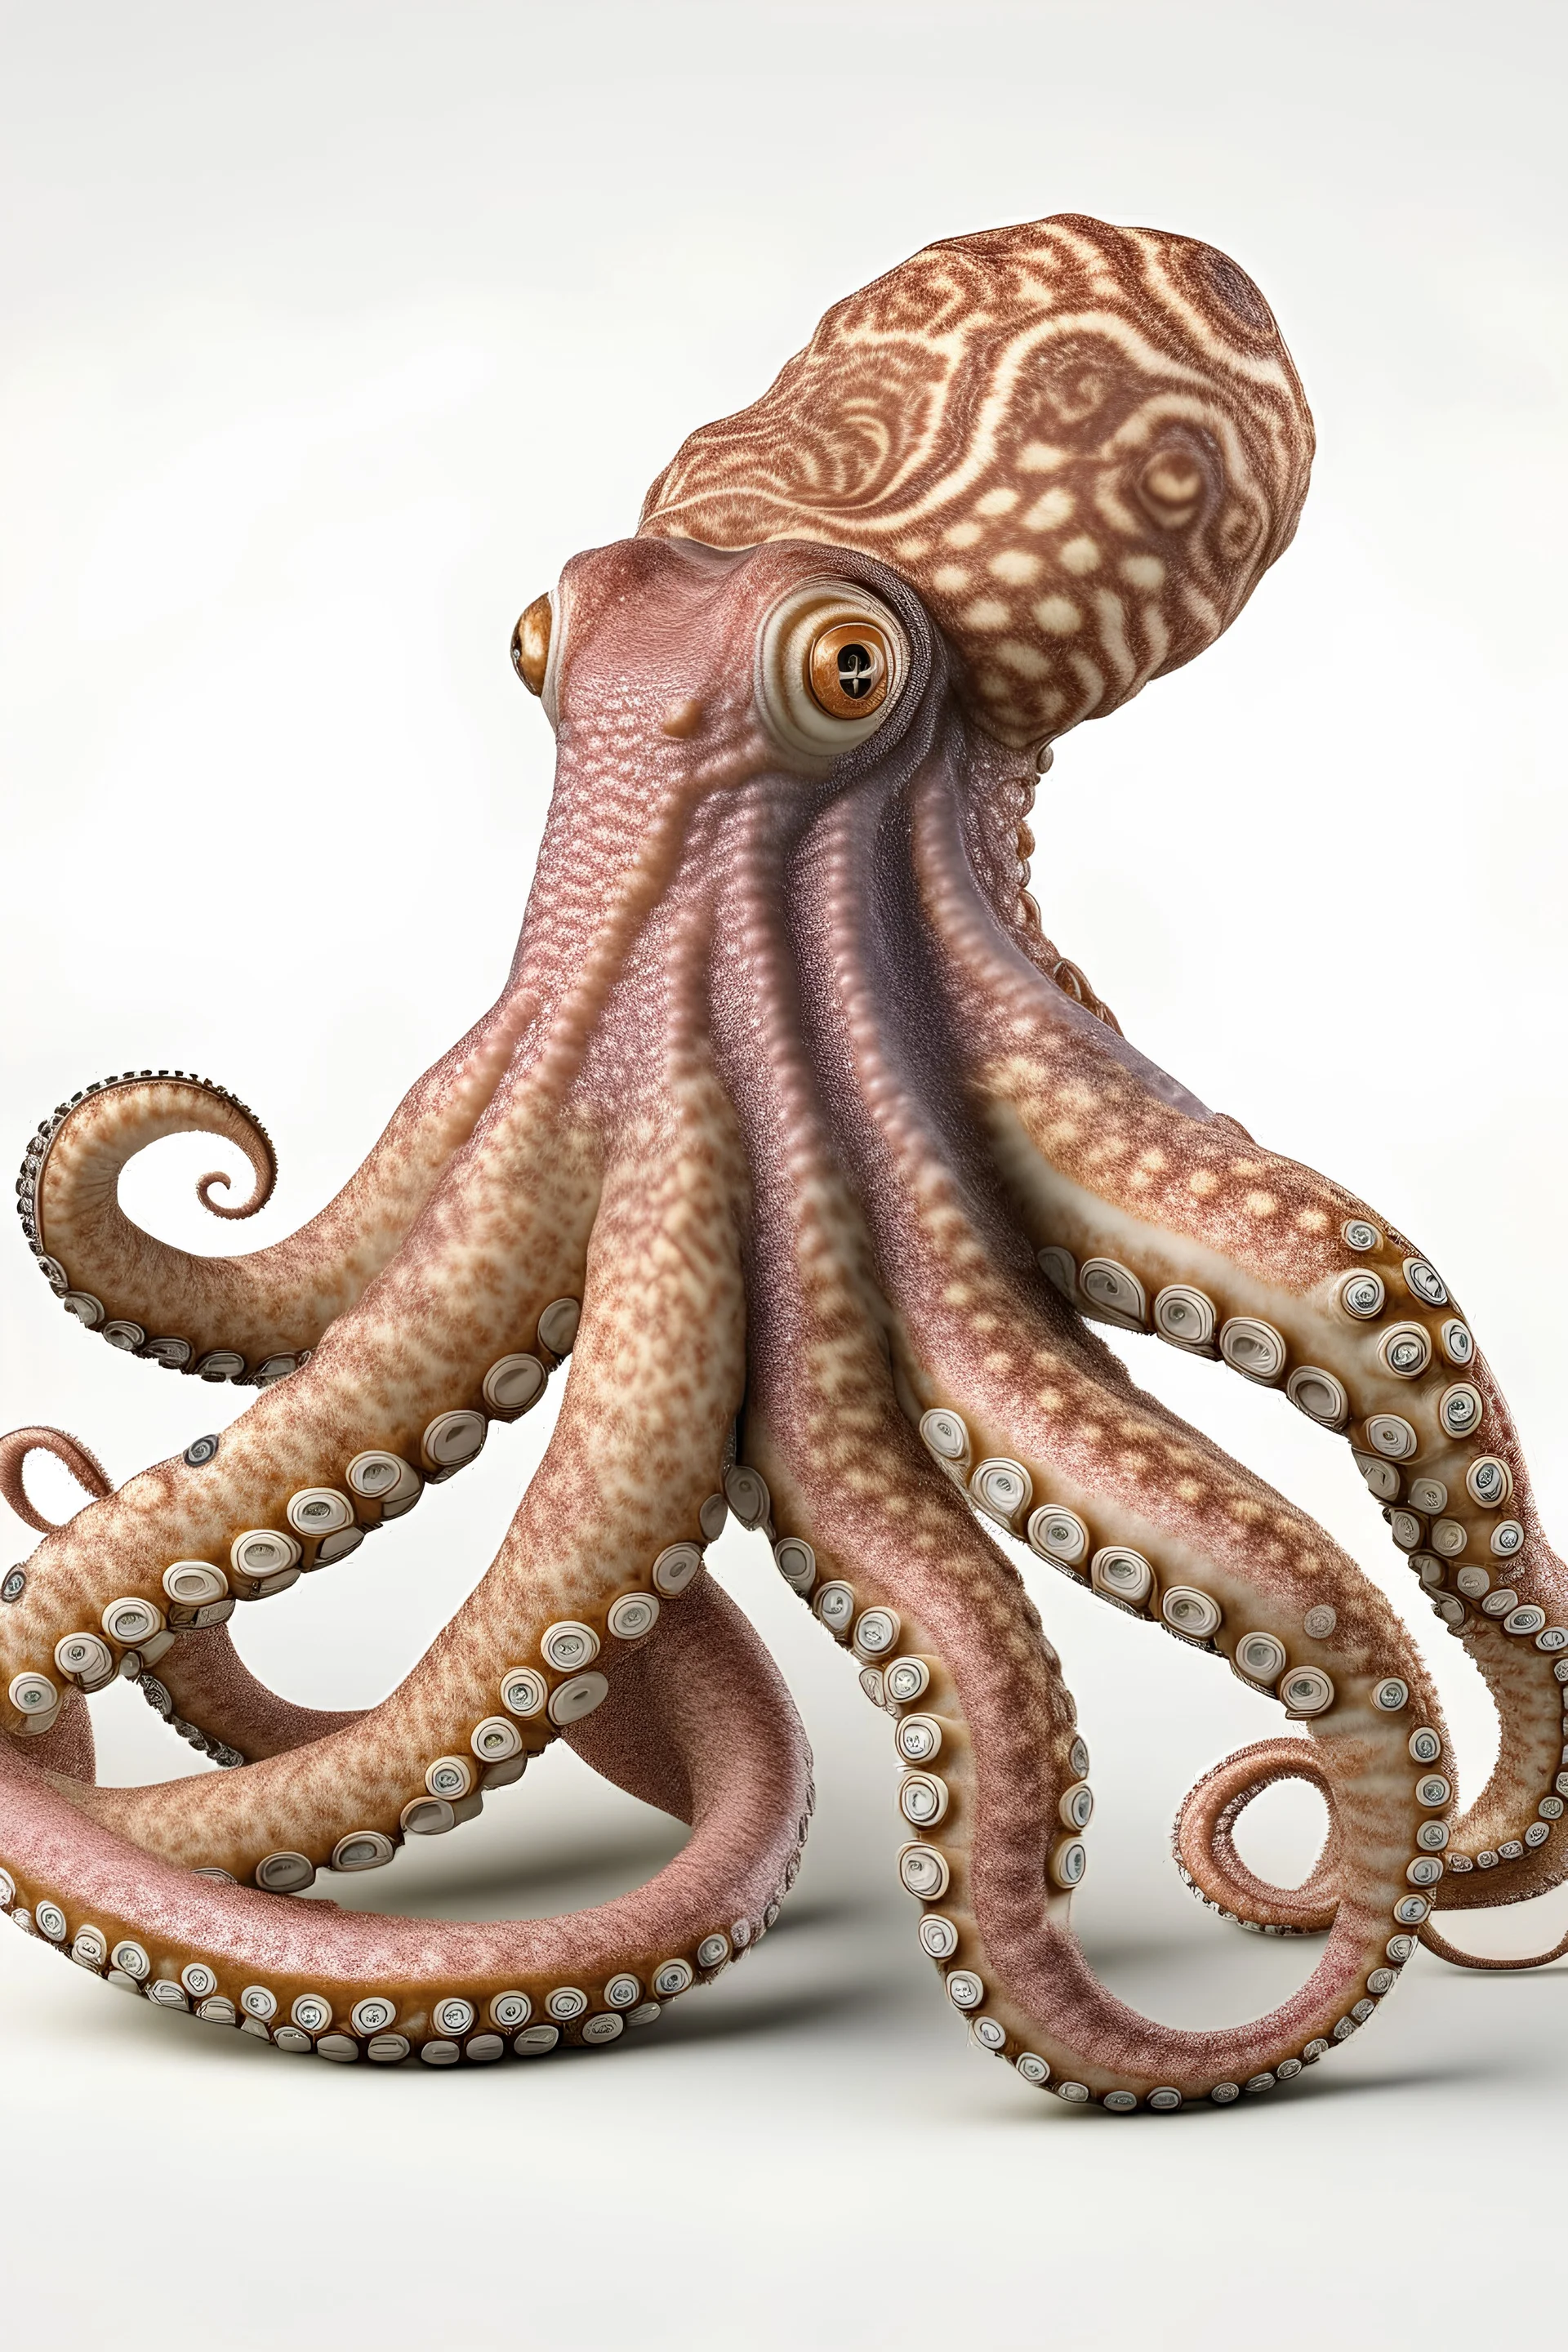 photoreal of a octopus, squid,